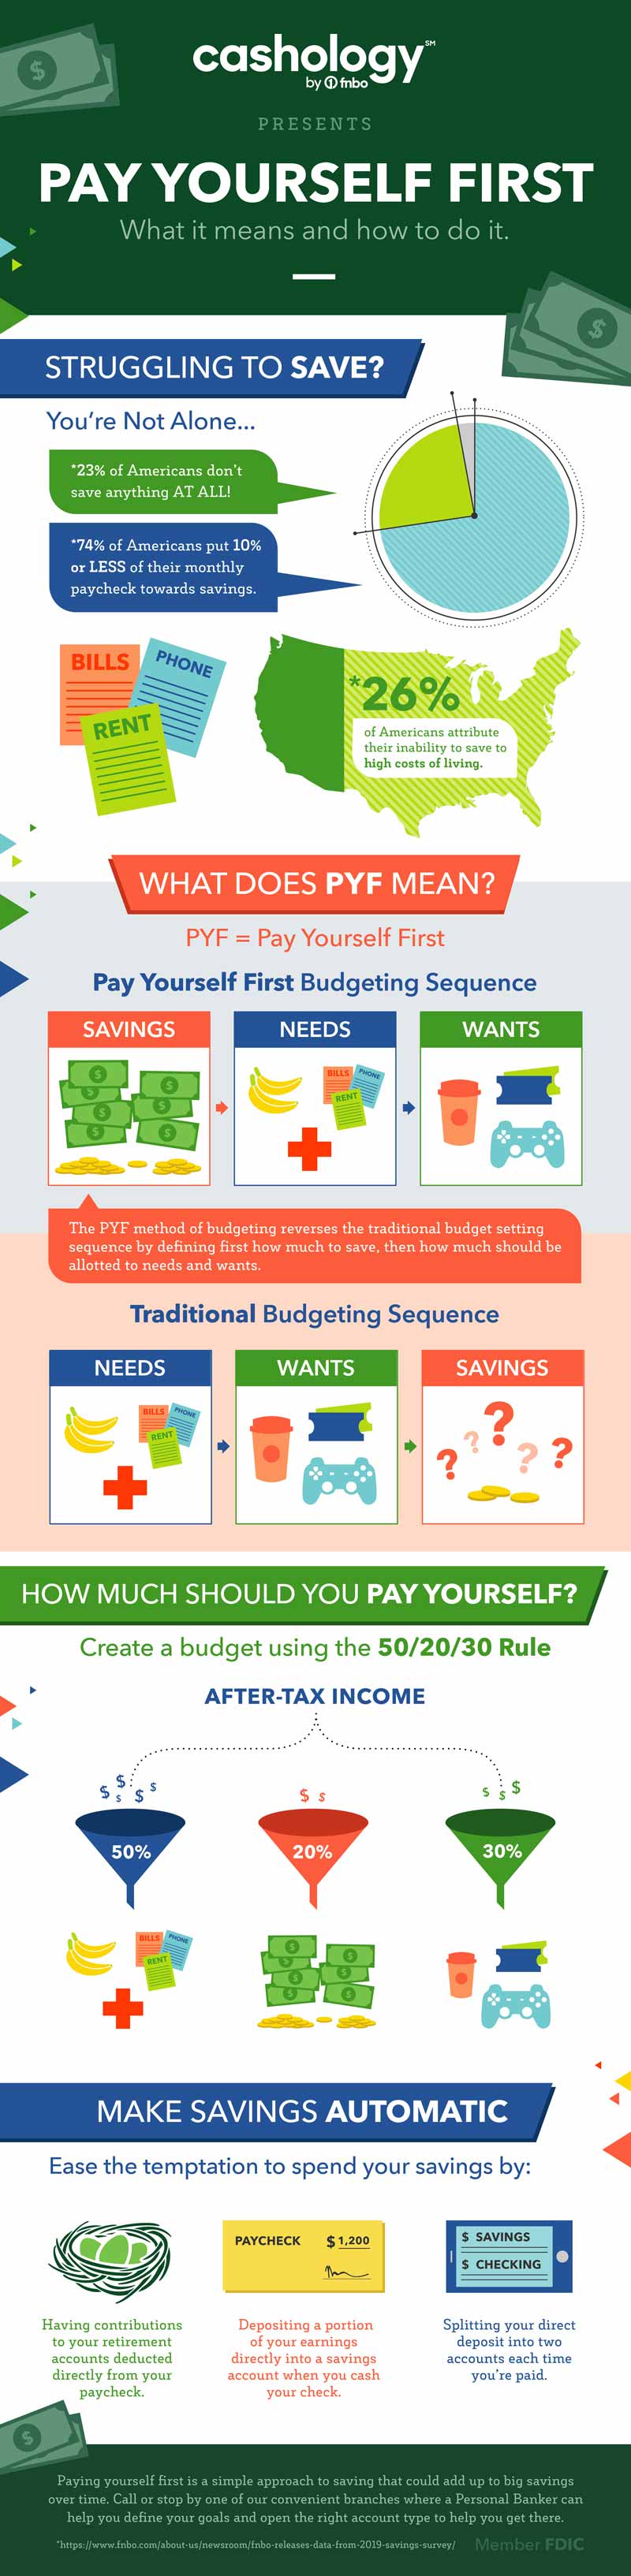 pay-yourself-first-infographic-800.jpg